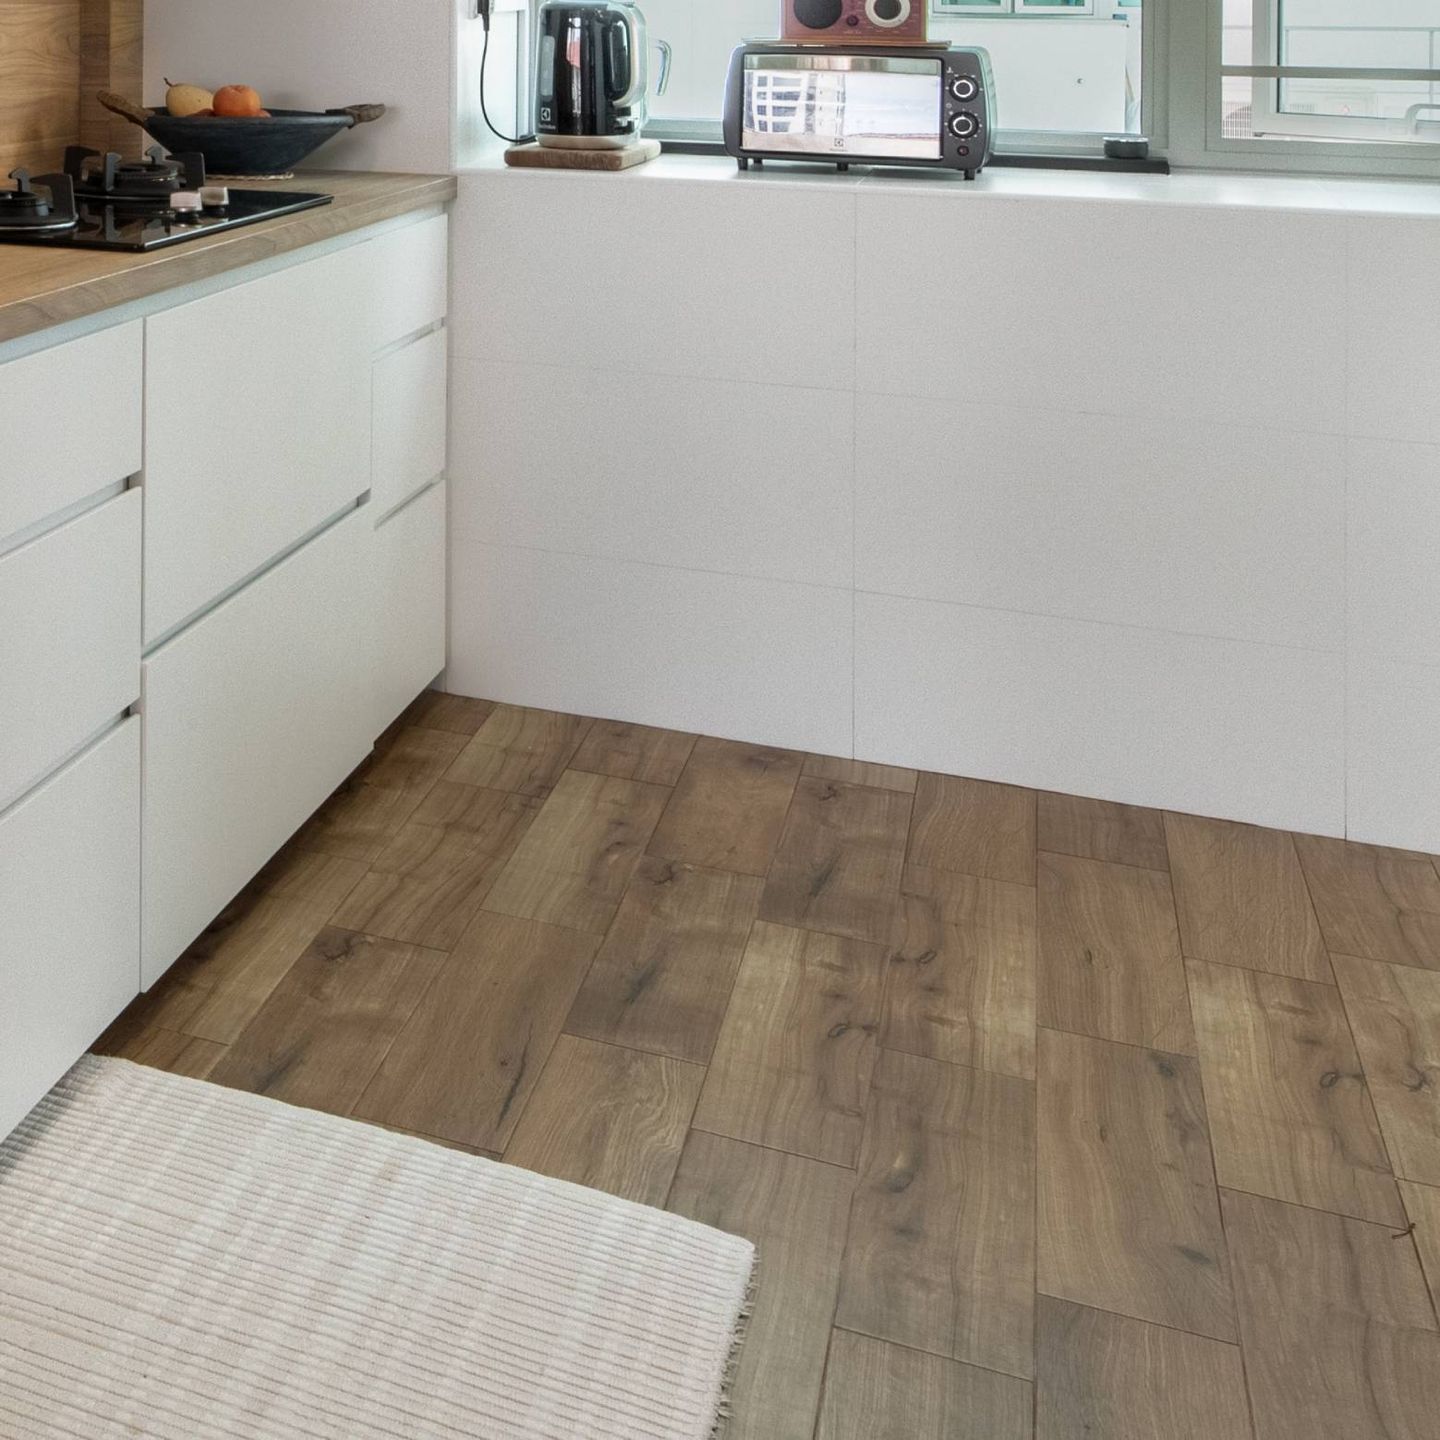 Anti-Skid Brown Flooring Design With A Wooden Finish - Livspace